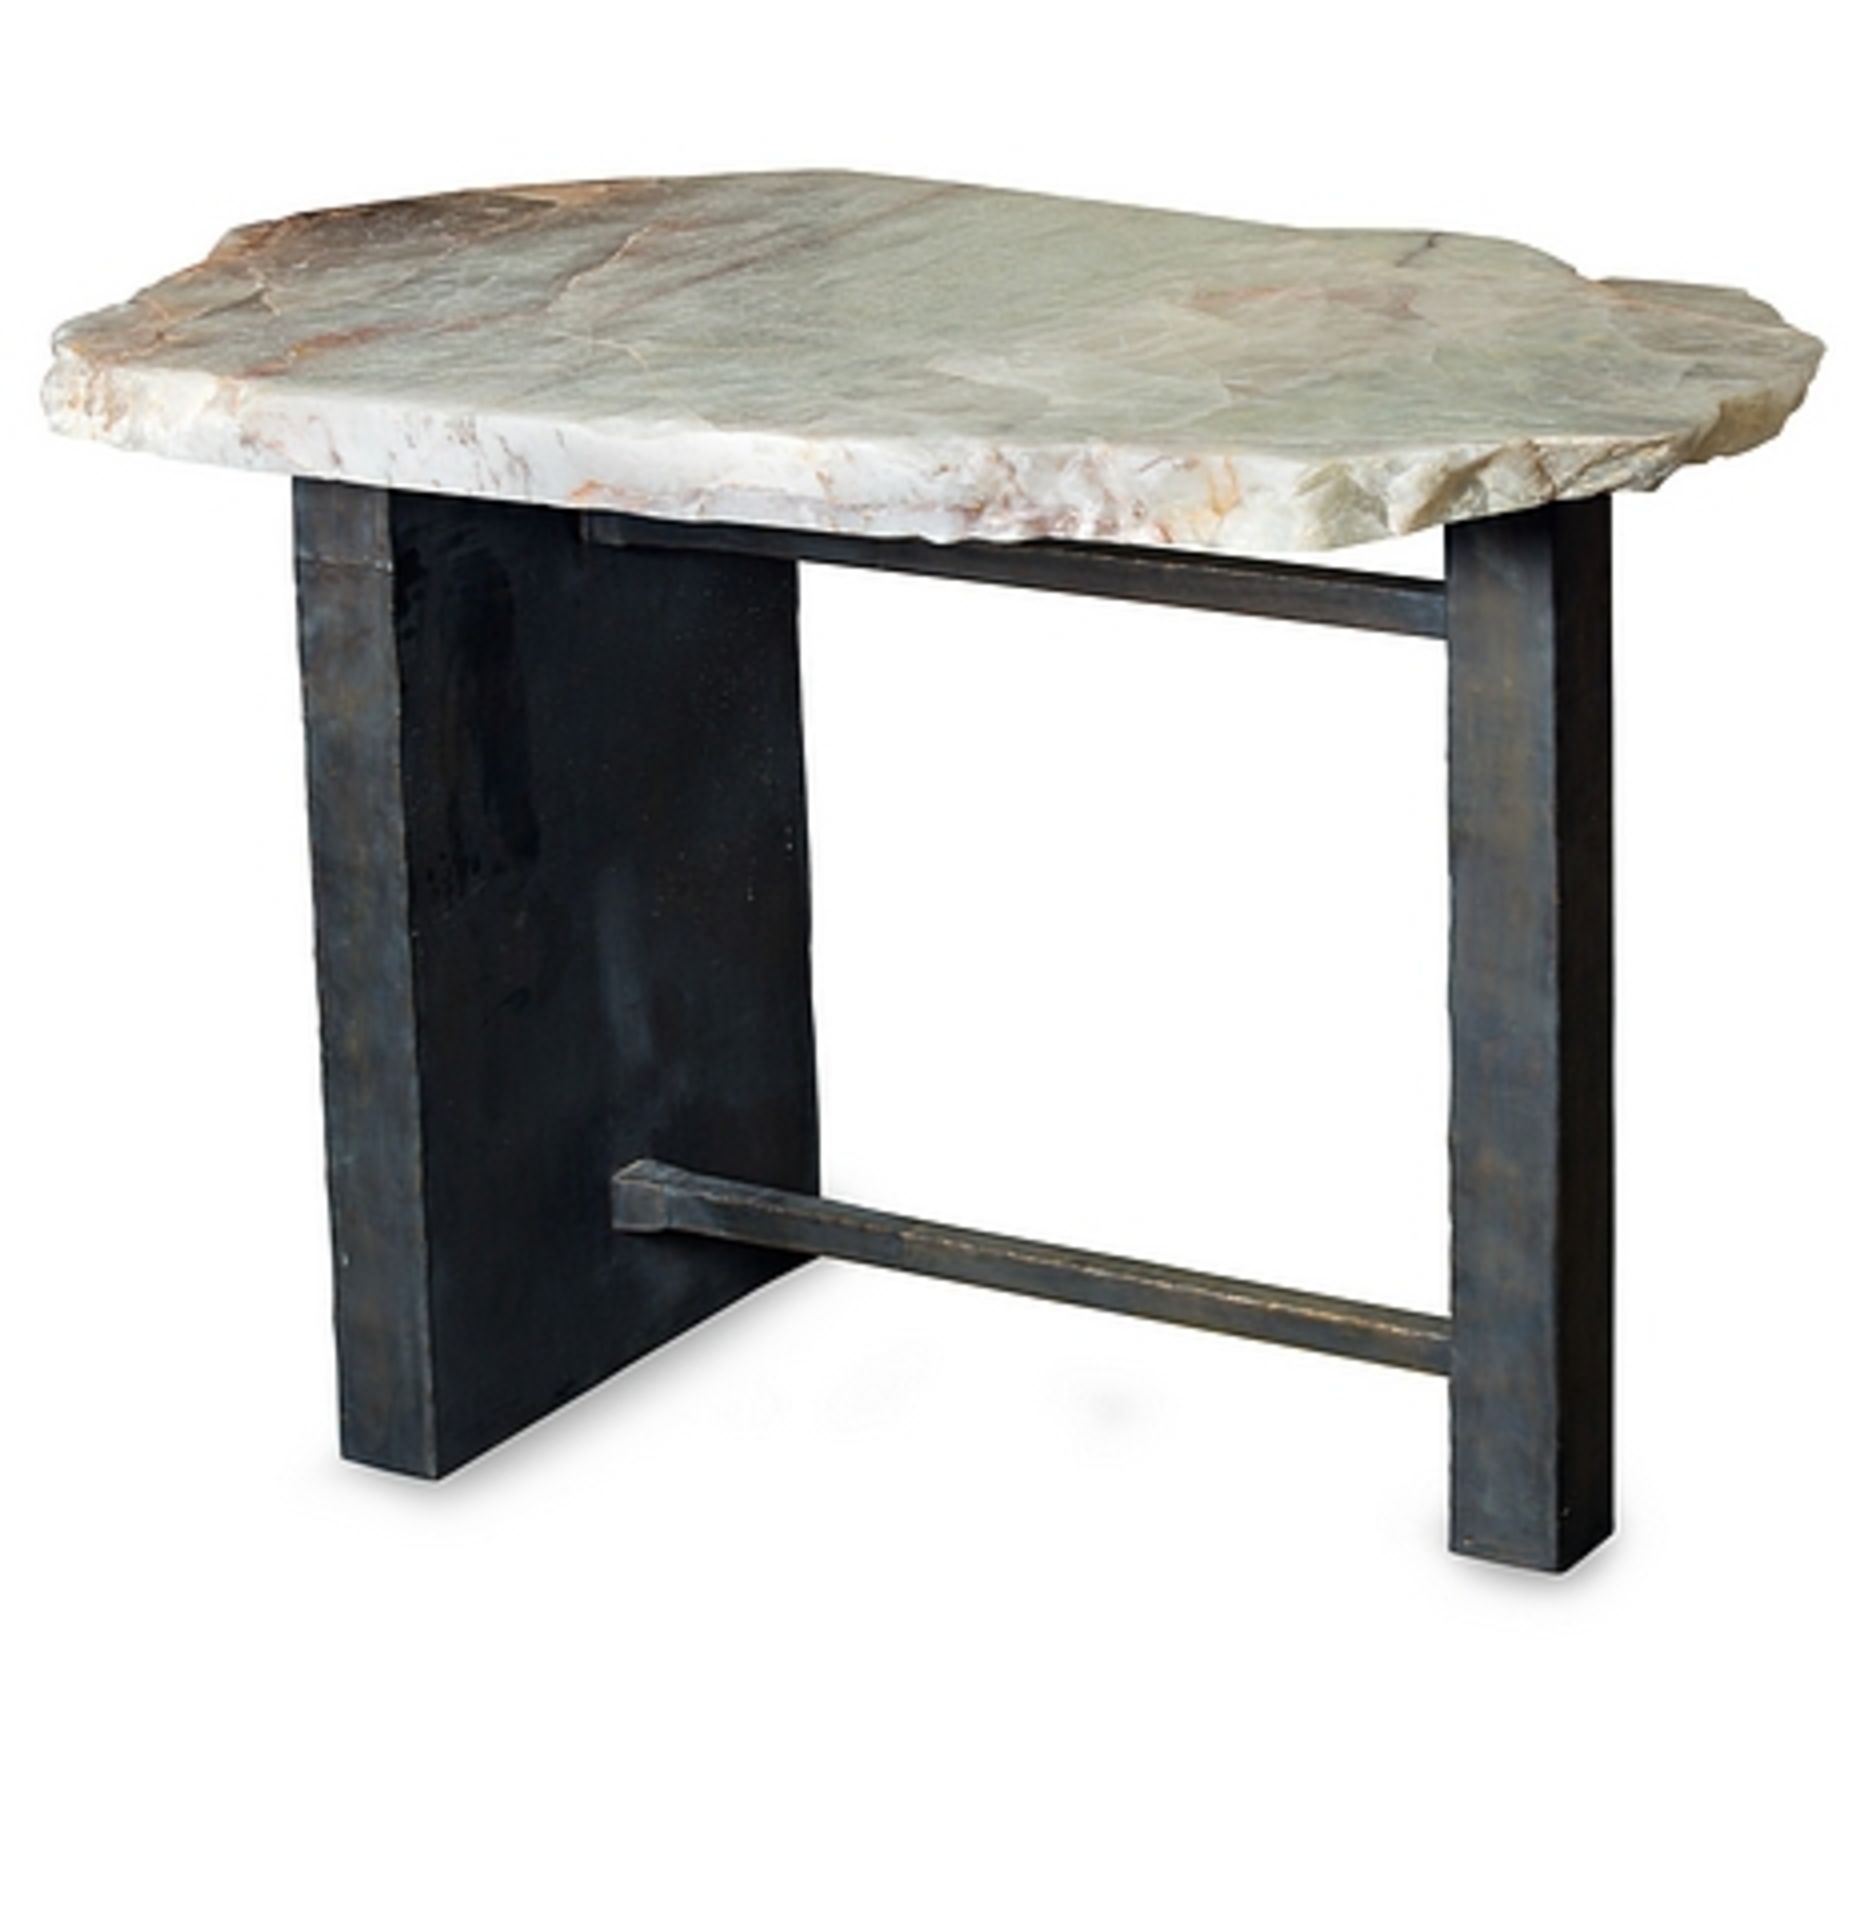 Bar table a hand carved clear quartz precious rock piece table top combines luxury and the - Image 4 of 4